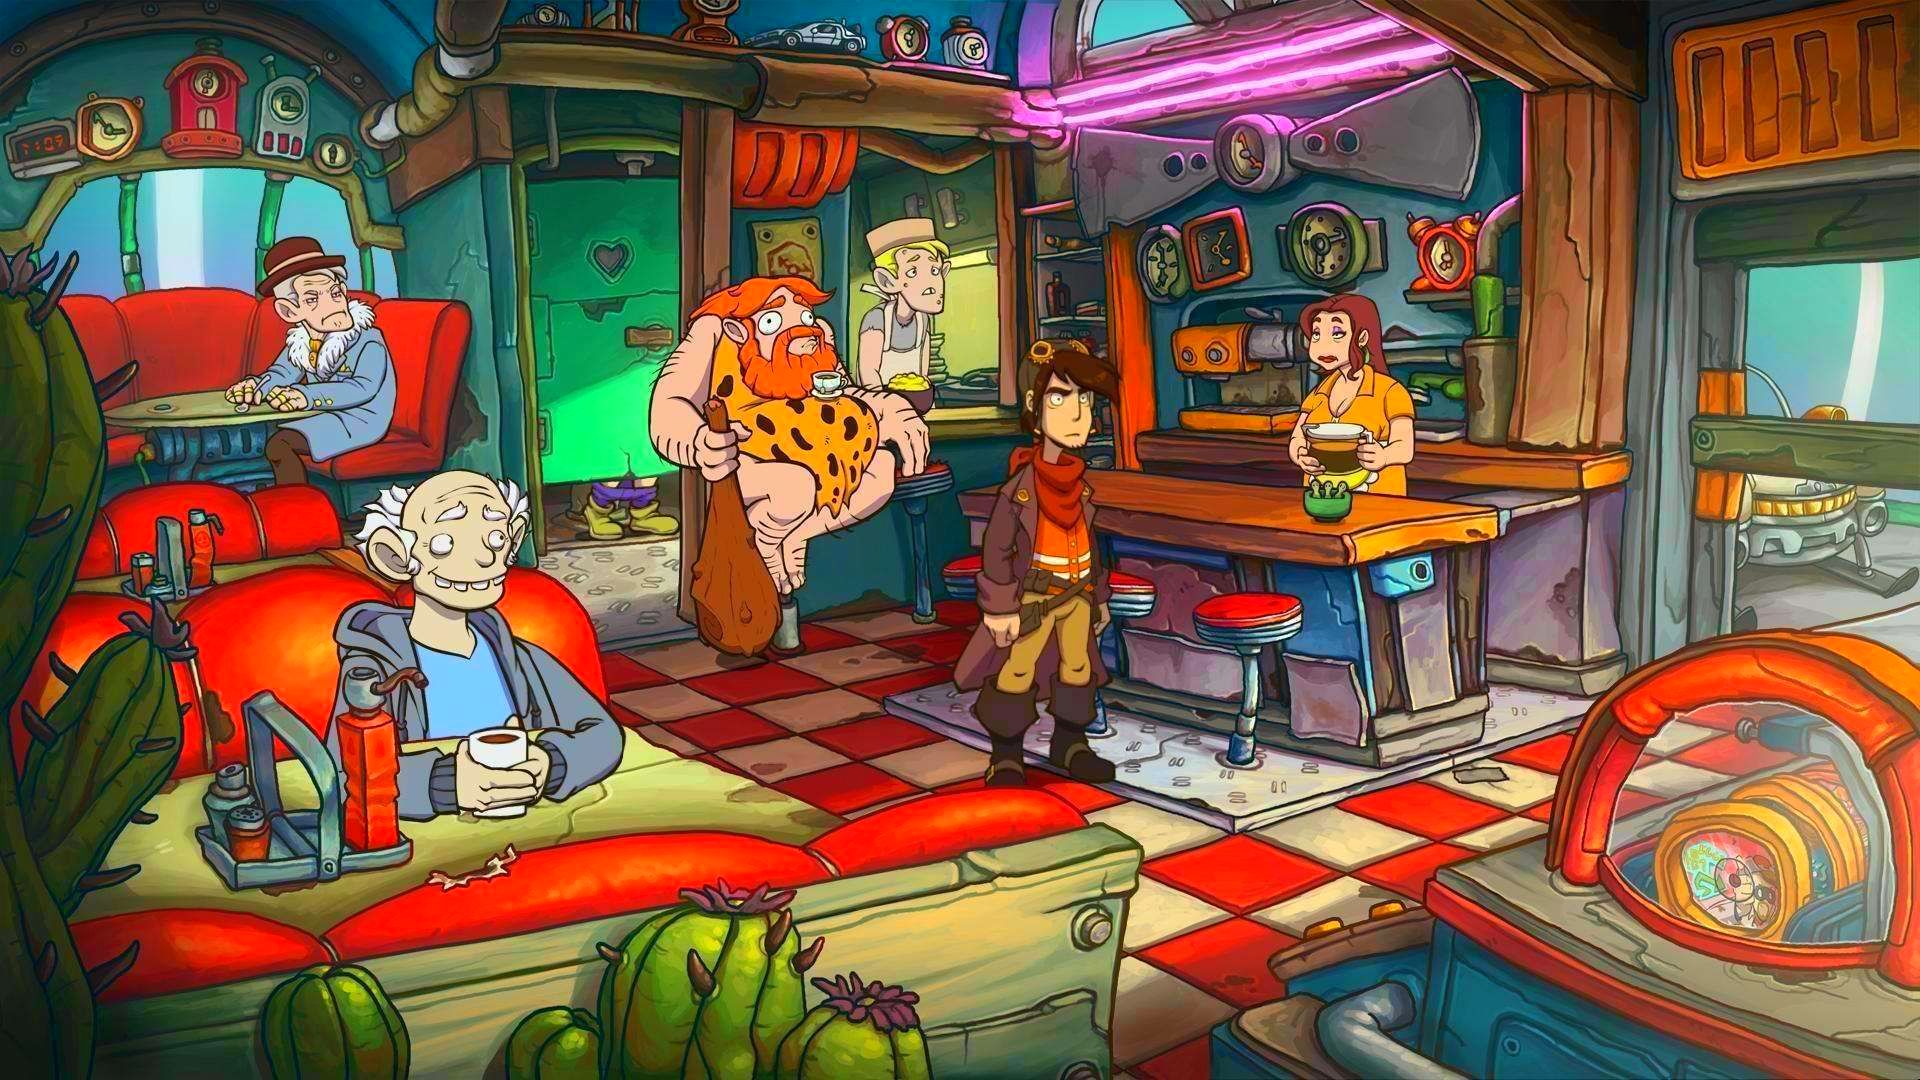 Screenshot from Deponia Doomsday (3/7)